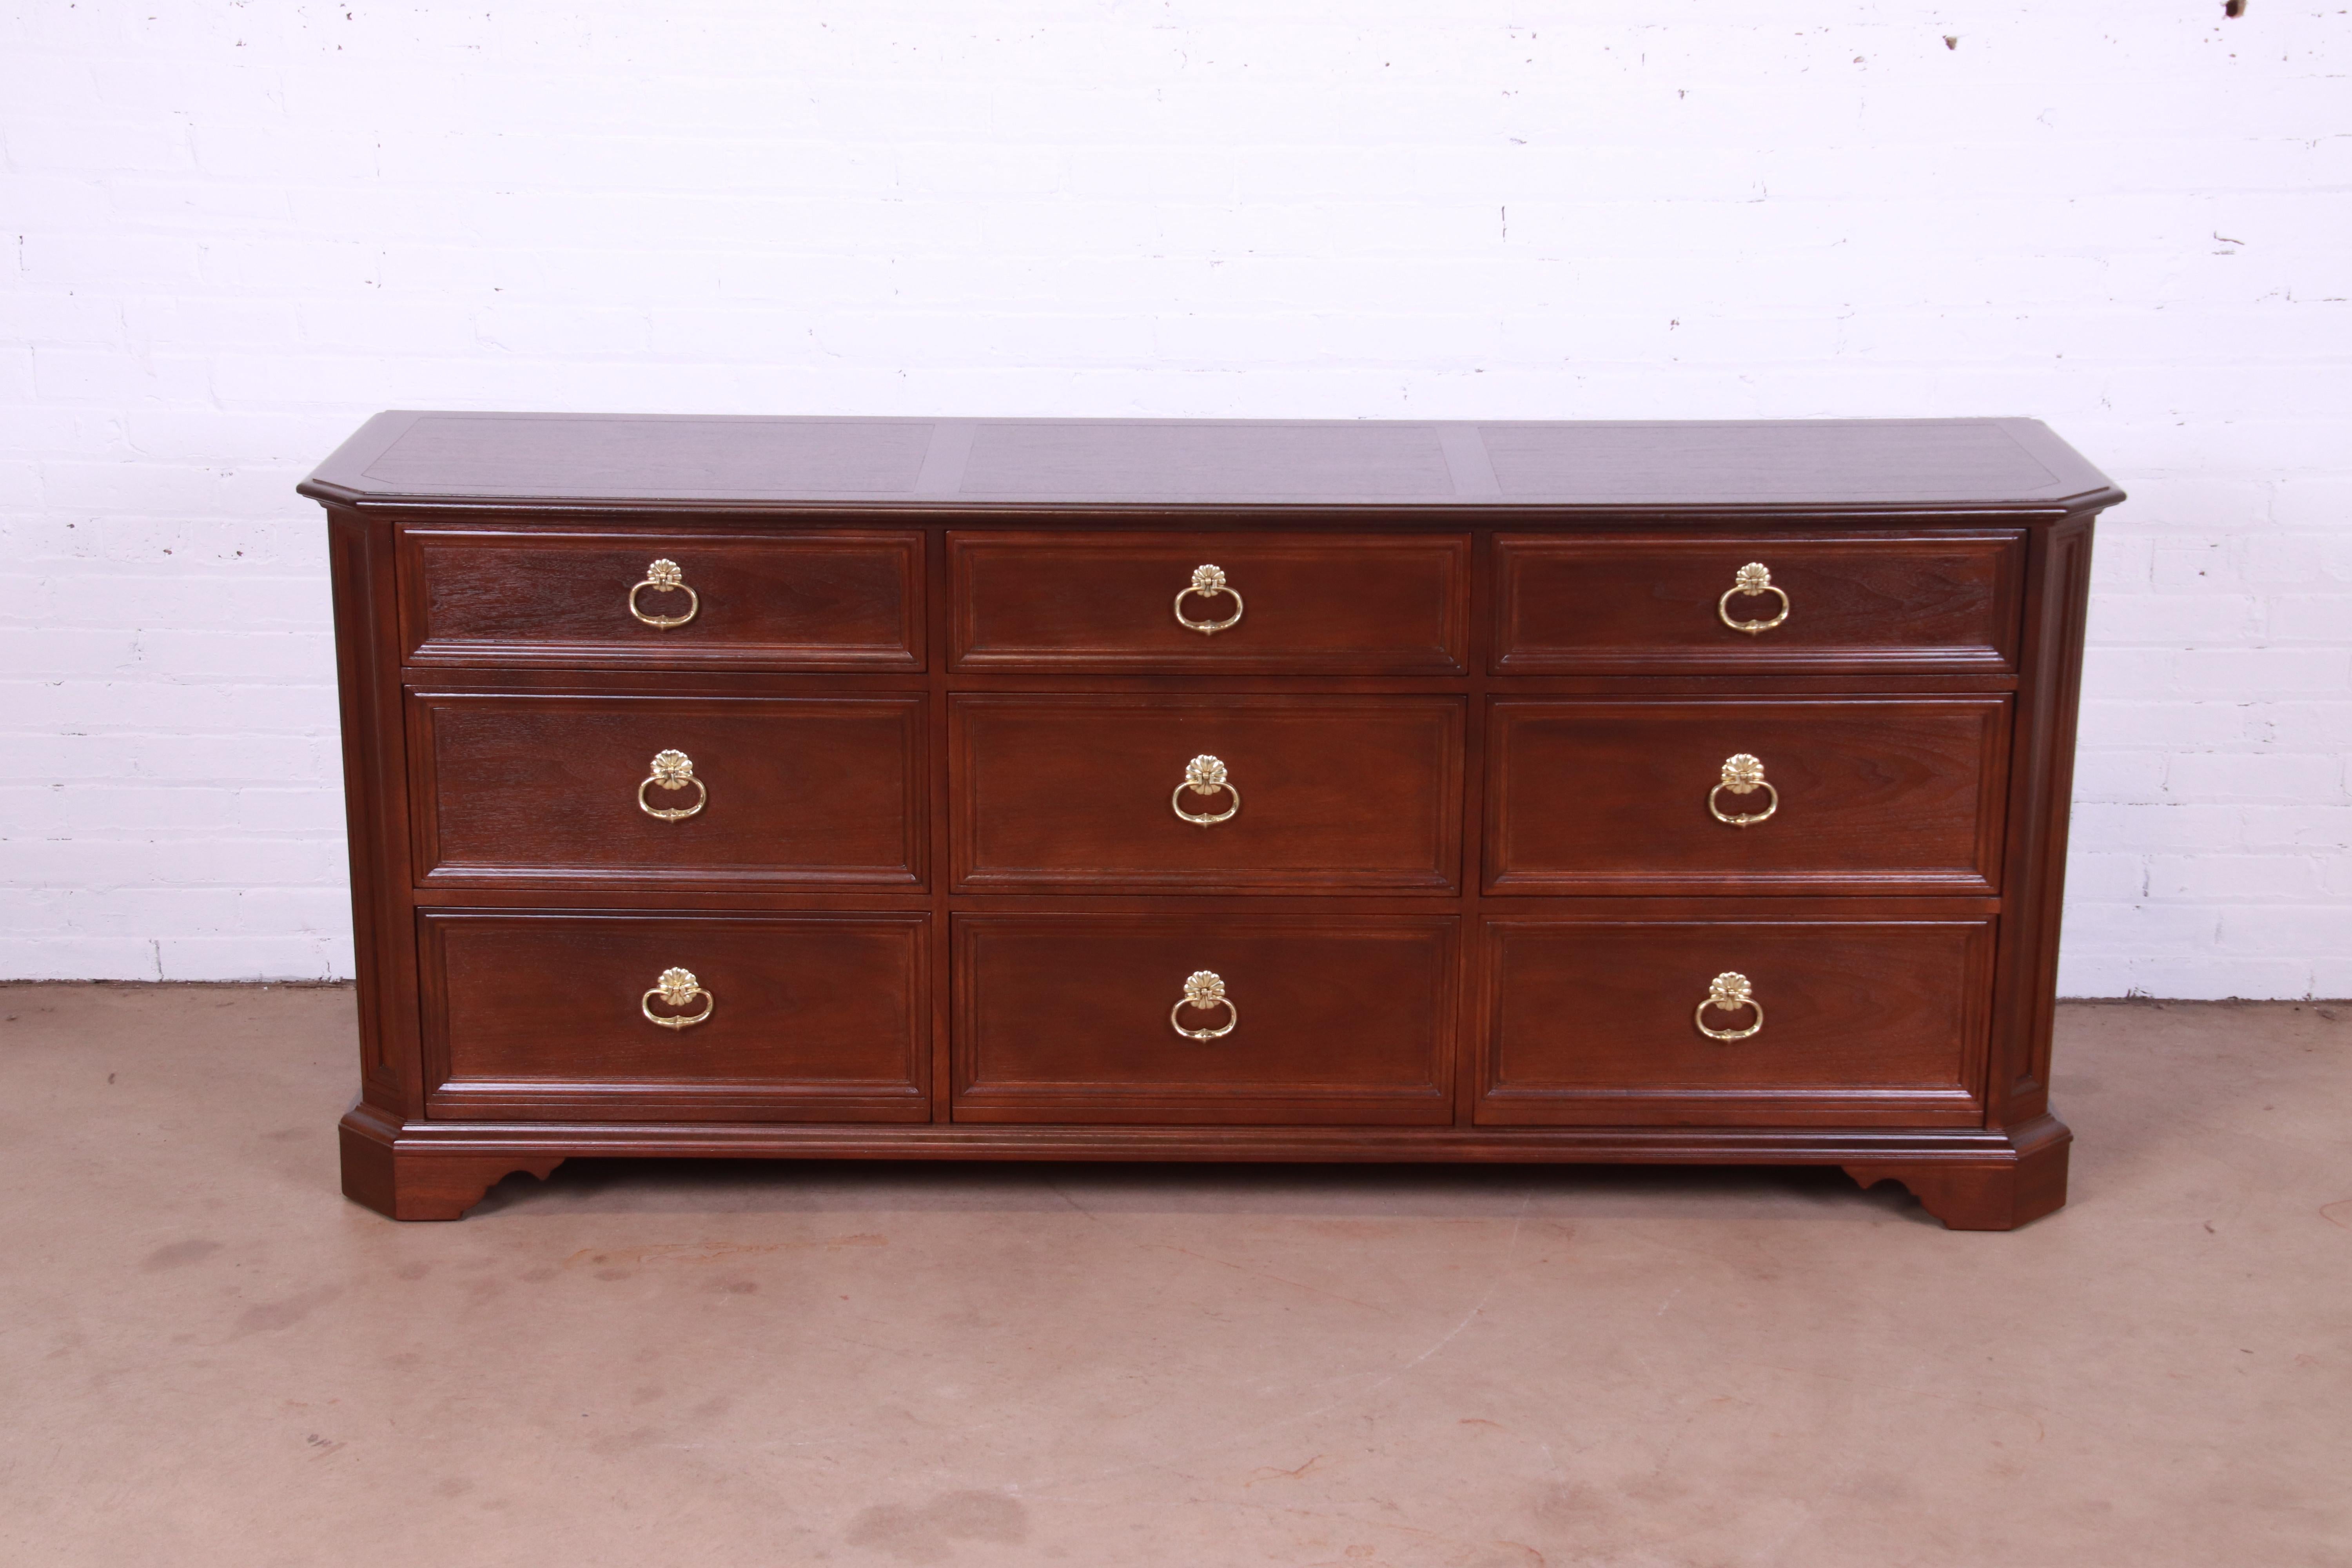 An exceptional Regency or Georgian style long dresser or credenza

By Baker Furniture, 